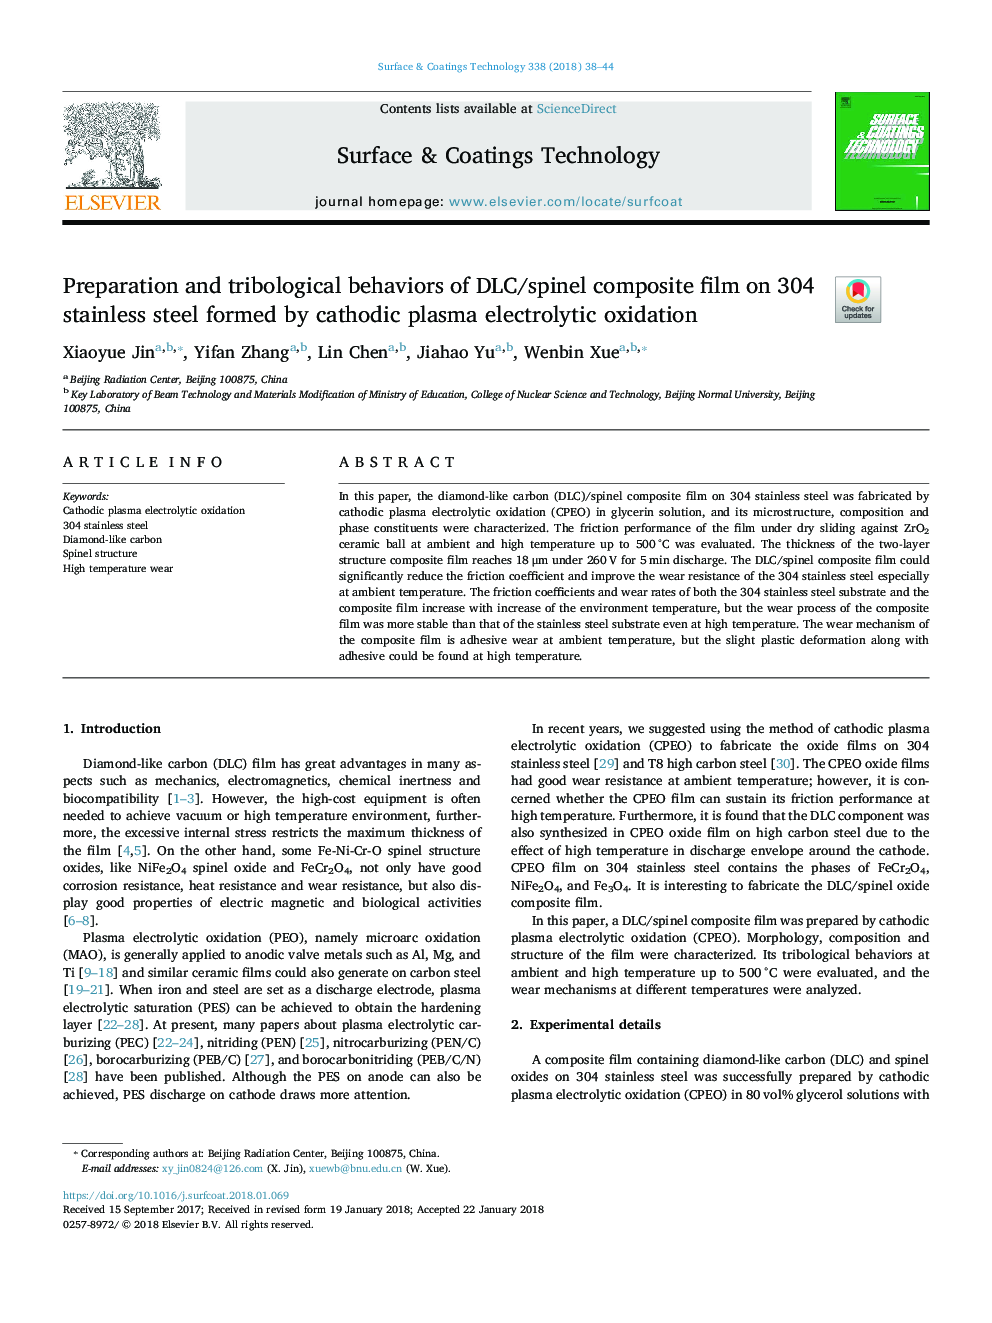 Preparation and tribological behaviors of DLC/spinel composite film on 304 stainless steel formed by cathodic plasma electrolytic oxidation